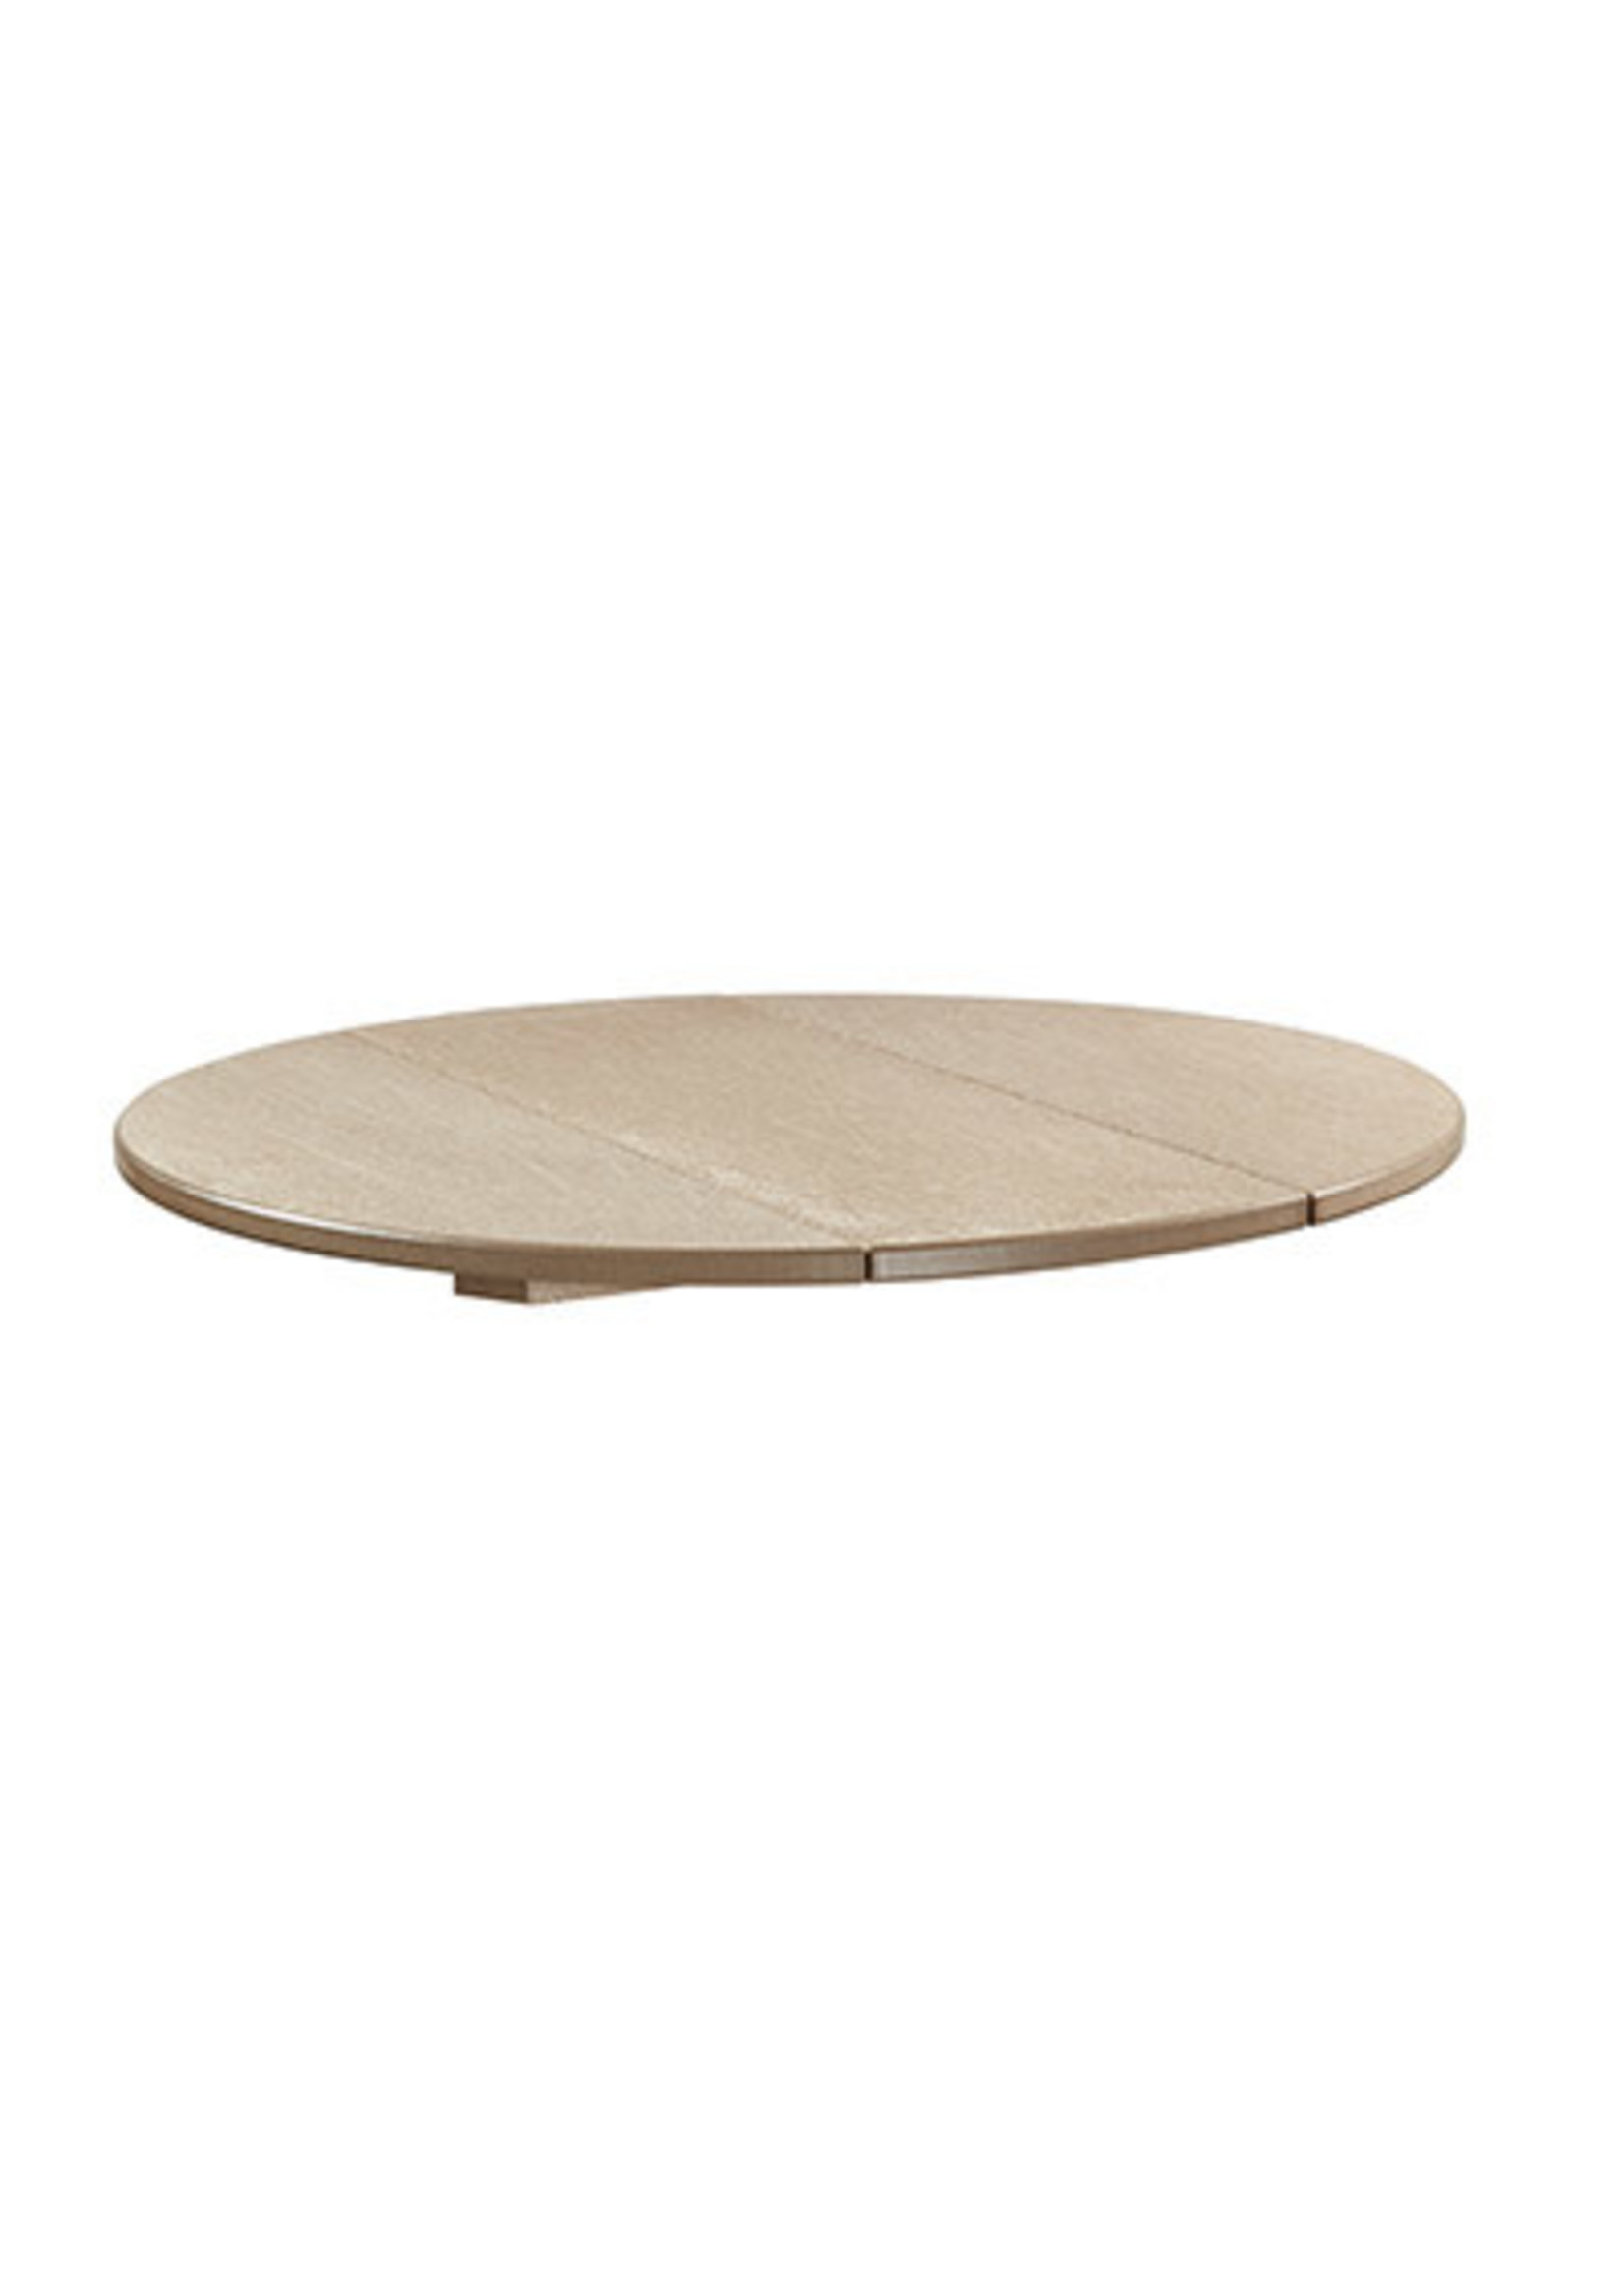 C.R. Plastic Products 181.TT03 * 32" Round Table Top,